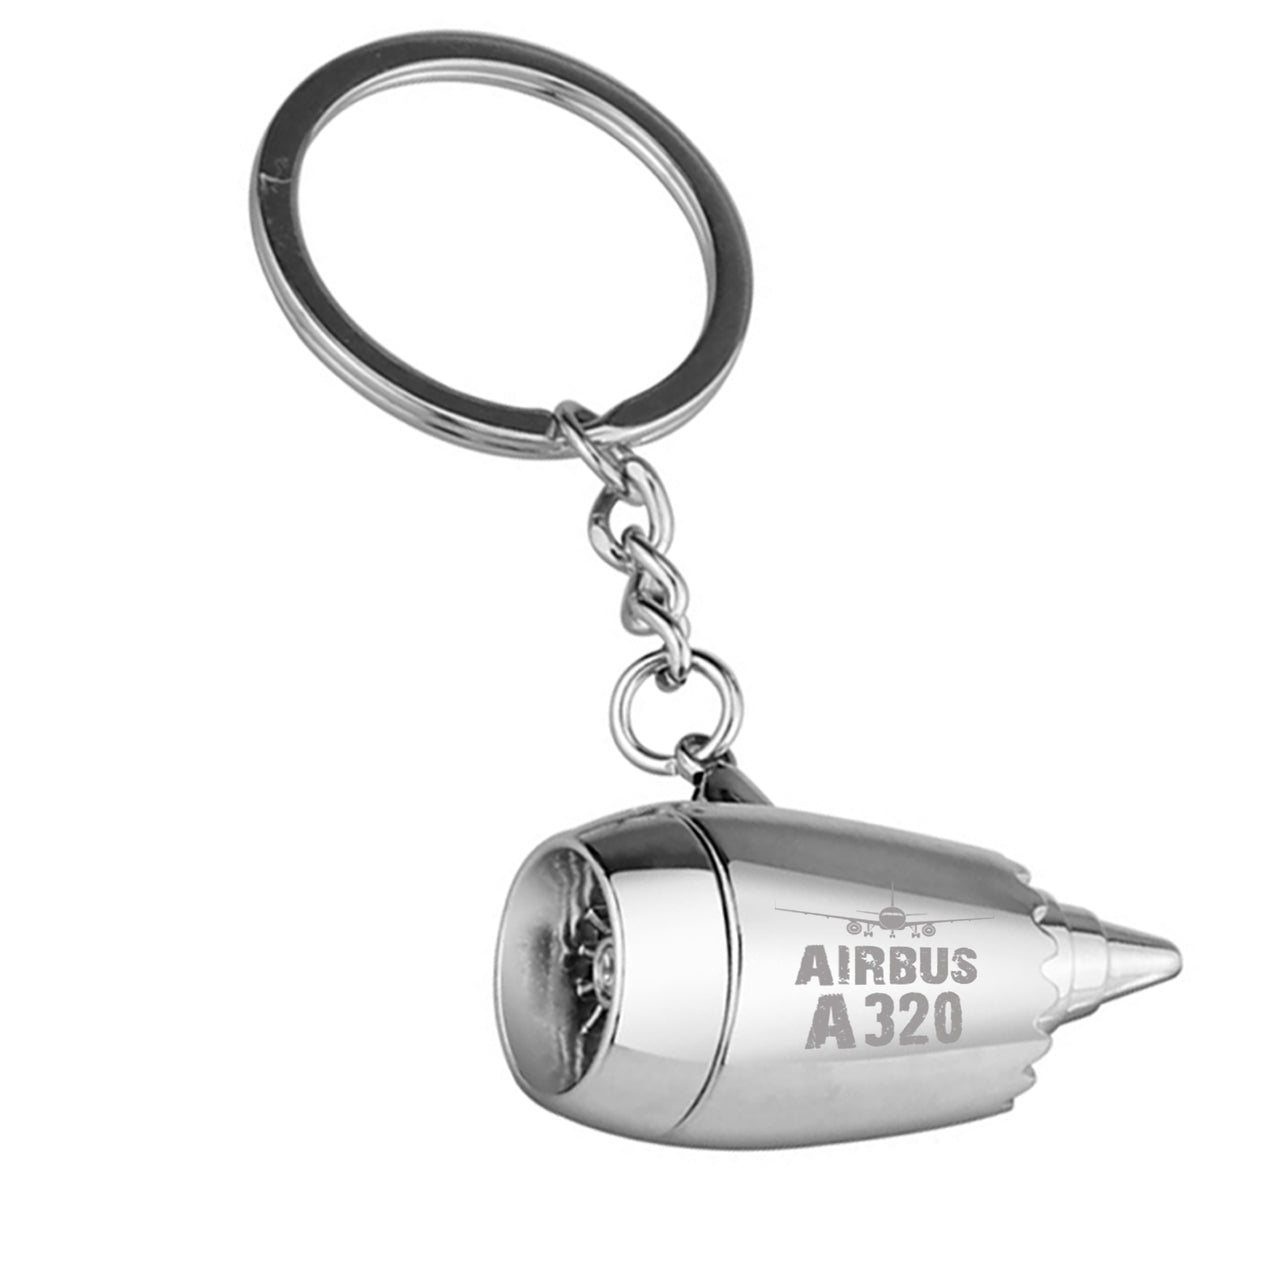 Airbus A320 & Plane Designed Airplane Jet Engine Shaped Key Chain